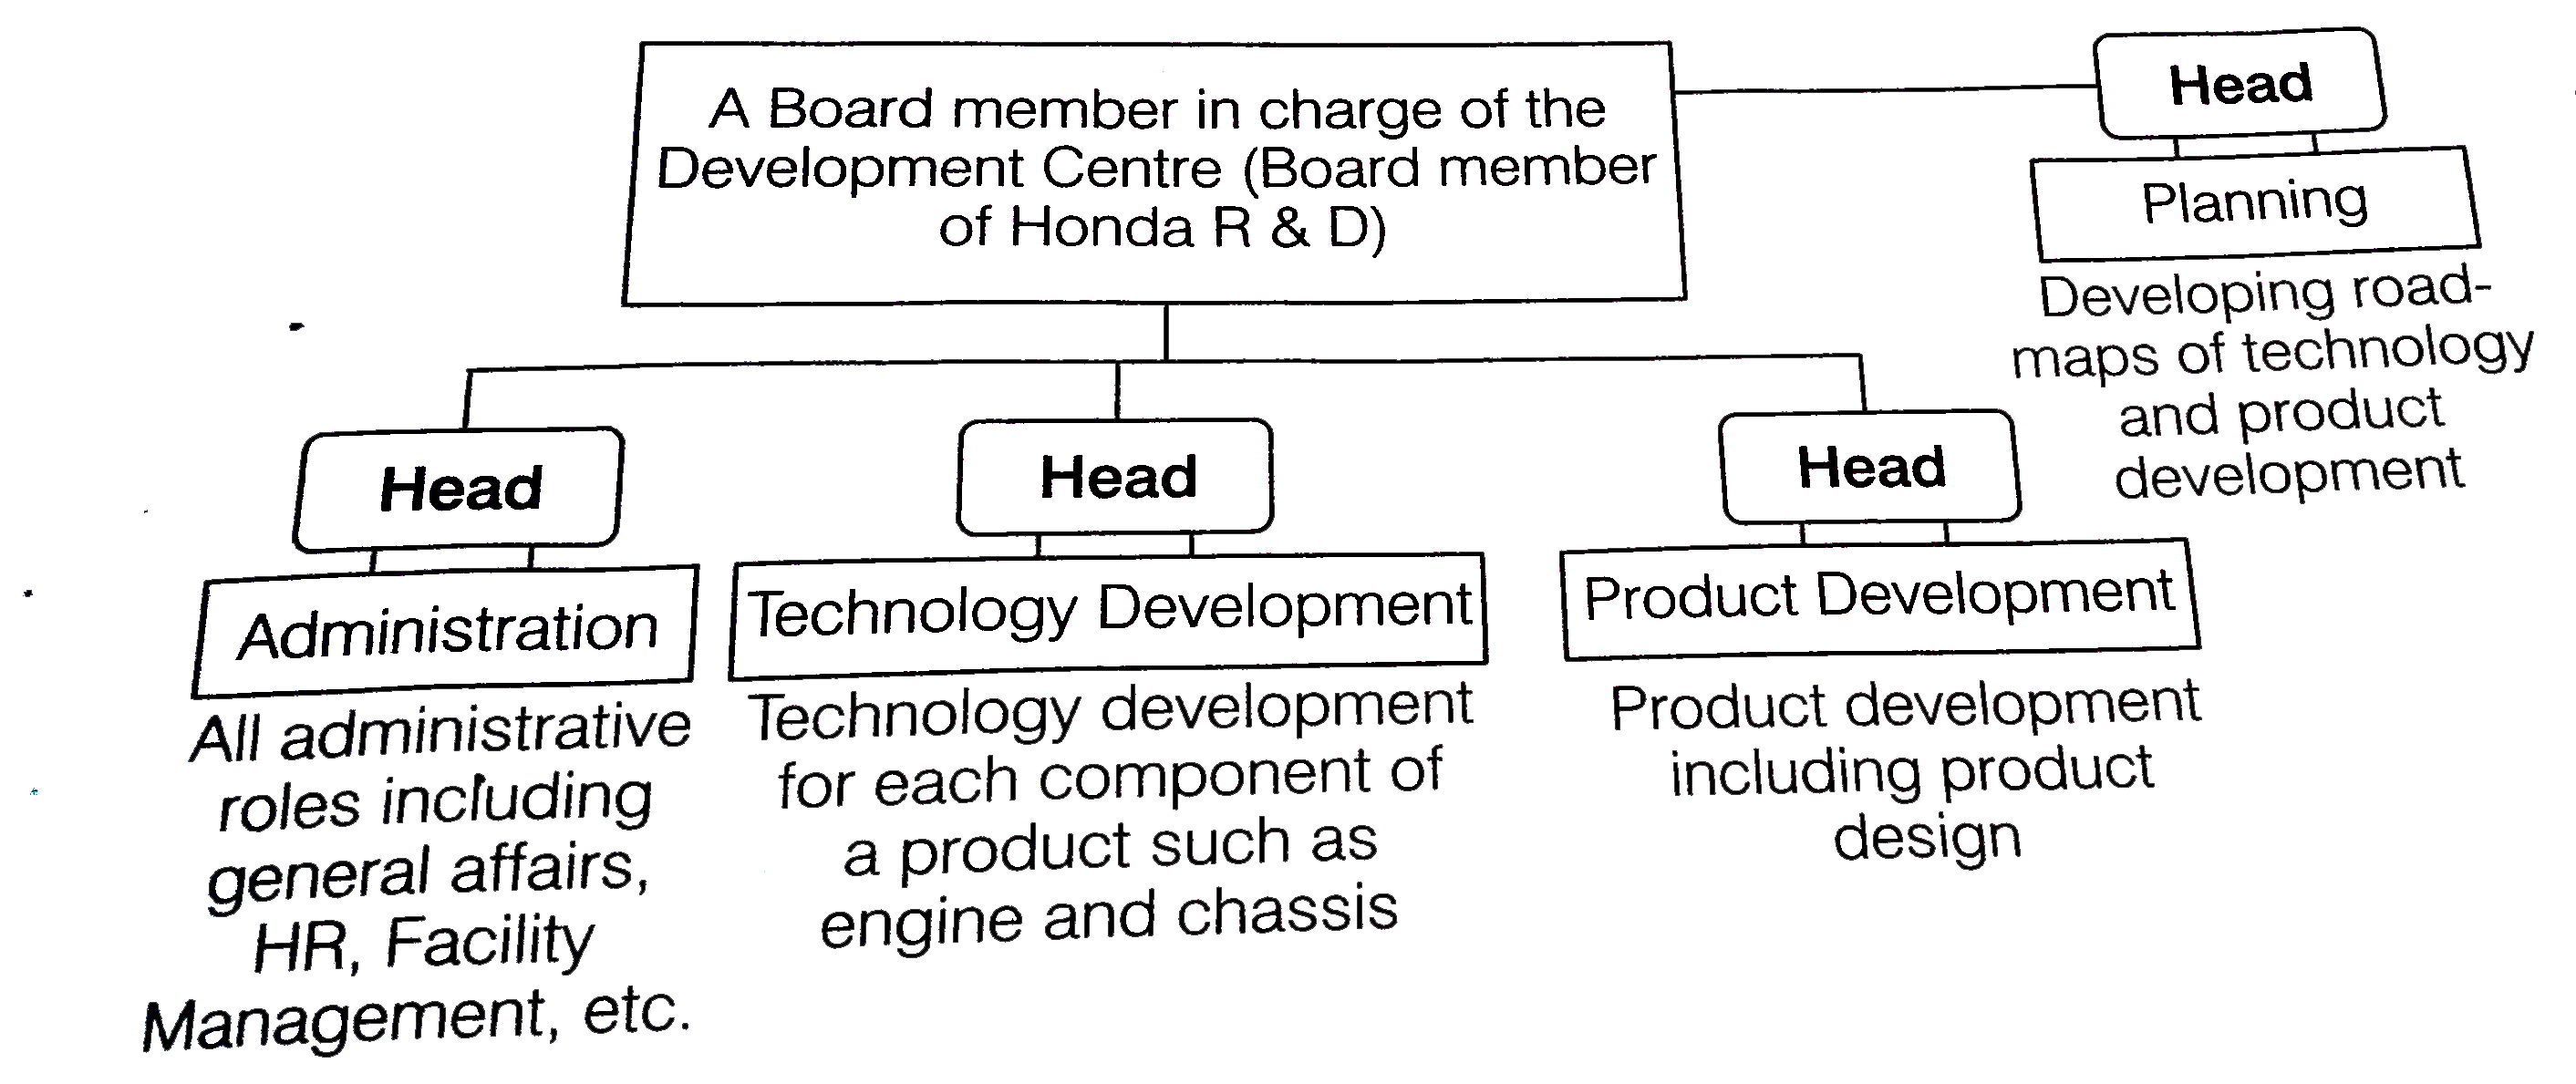 Honda to Strengthen Structure of its R&D Operations   Corporate February 21, 2006   TOKYO, Japan, February 21, 2006 - Honda Motor Co. Ltd. Announced plans, effective April 1, 2006, to launch a new organisational structure for Honda responsible for research & development activities. Due to recent technological advancements and continued business expansion, the variety and complexity of technological compnents and the number of vechicles under  development at Honda R&D have increased dramatically.   The new structure will be launched  both in response to this situation and to prepare for further expansion of business in the future. The new structure will enable each associate to demonstrate a high level of initiative, with more clear definition of roles and responsibilities and bold delegation of authority. Moreover, the new structure is designed to achieve smoother communication to help accelerate decision making within the organisation. The key elements of the new structure are as follows:   Outline of the New Structure:   1. Existing R&D centers including Asaka R&D Center, Wako R&D Center, and Tochigi R&D Center , which currently organised based on geographical location and will be reorganised into five centers based on specific functions. The names of the five centers will be Motorcycle Development Center, Automobile Dvelopment Center. Power Products Development Center, Aero Engine Development Center, and Basic Technology Research Center.   2. Each center will have separate offices for planning, product development, technology development and administration with clearly defined roles.   3. Primary authority to make operational decisions, currently held by the head of each center, will delegated to the head of each office within each center to achieve an autonomous operational structure through which each office can make more decisions.      4. A flat and less-layered organisational structure will be employed to ensure smooth and direct communications between the head of the office and each associate.   5. The product development function of the Automobile Development Center will be further separated between the Honda brand and Acura brand.   This structure change is a part of Honda's continuous effort to strengthen the core characteristics that makes Honda unique, and its purpose is to continue creating advanced and creative technologies and products that are unique to Honda, which in turn will enable Honda to continue to be a company the society wants to exist.   Enumerate the advantages of such a structure.